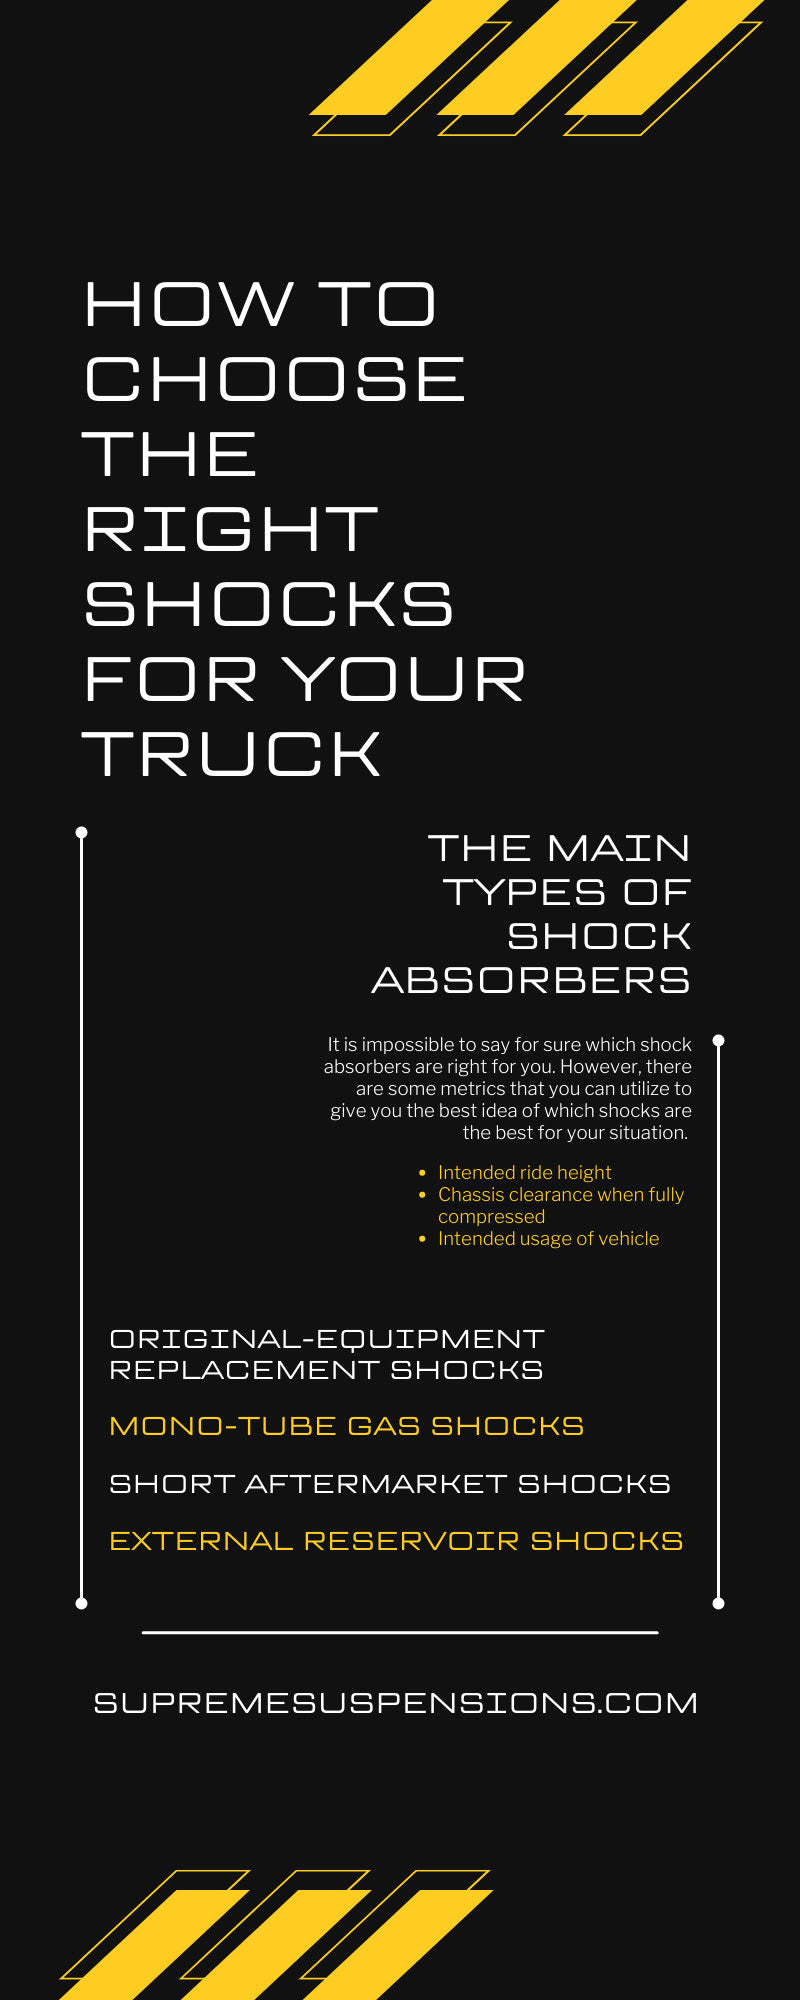 How To Choose the Right Shocks for Your Truck